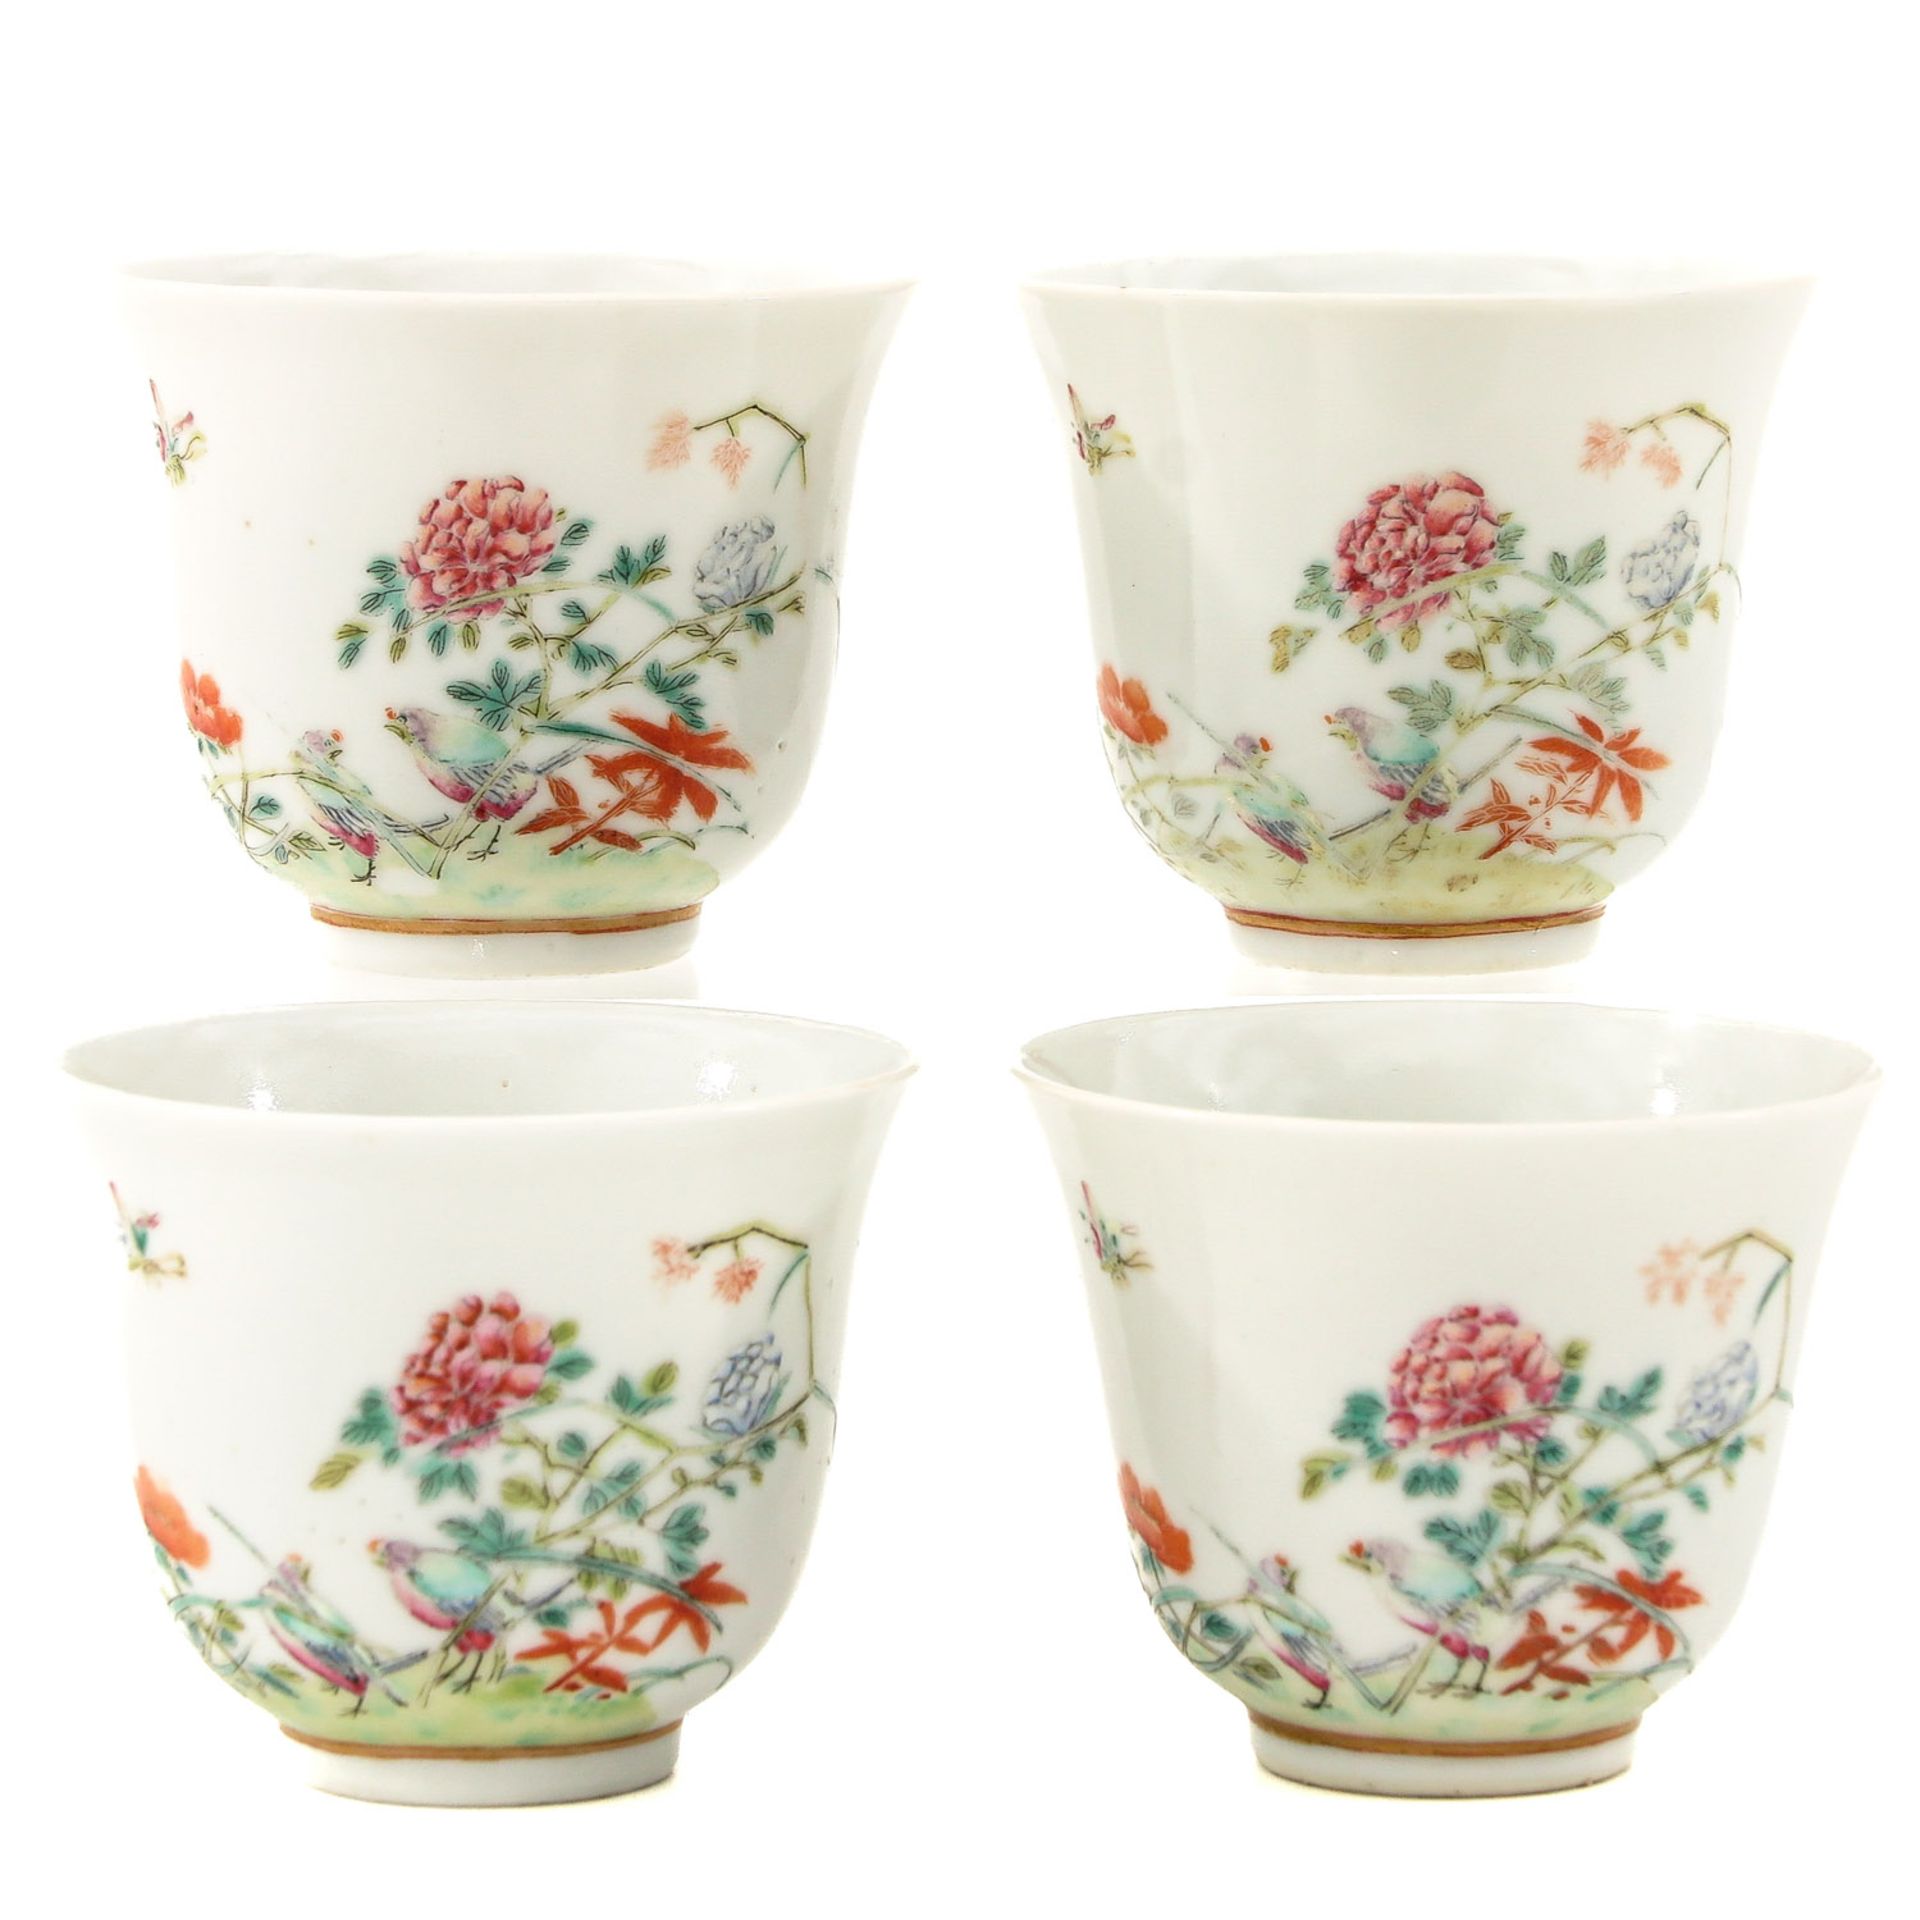 A Collection of 4 Famille Rose Cups